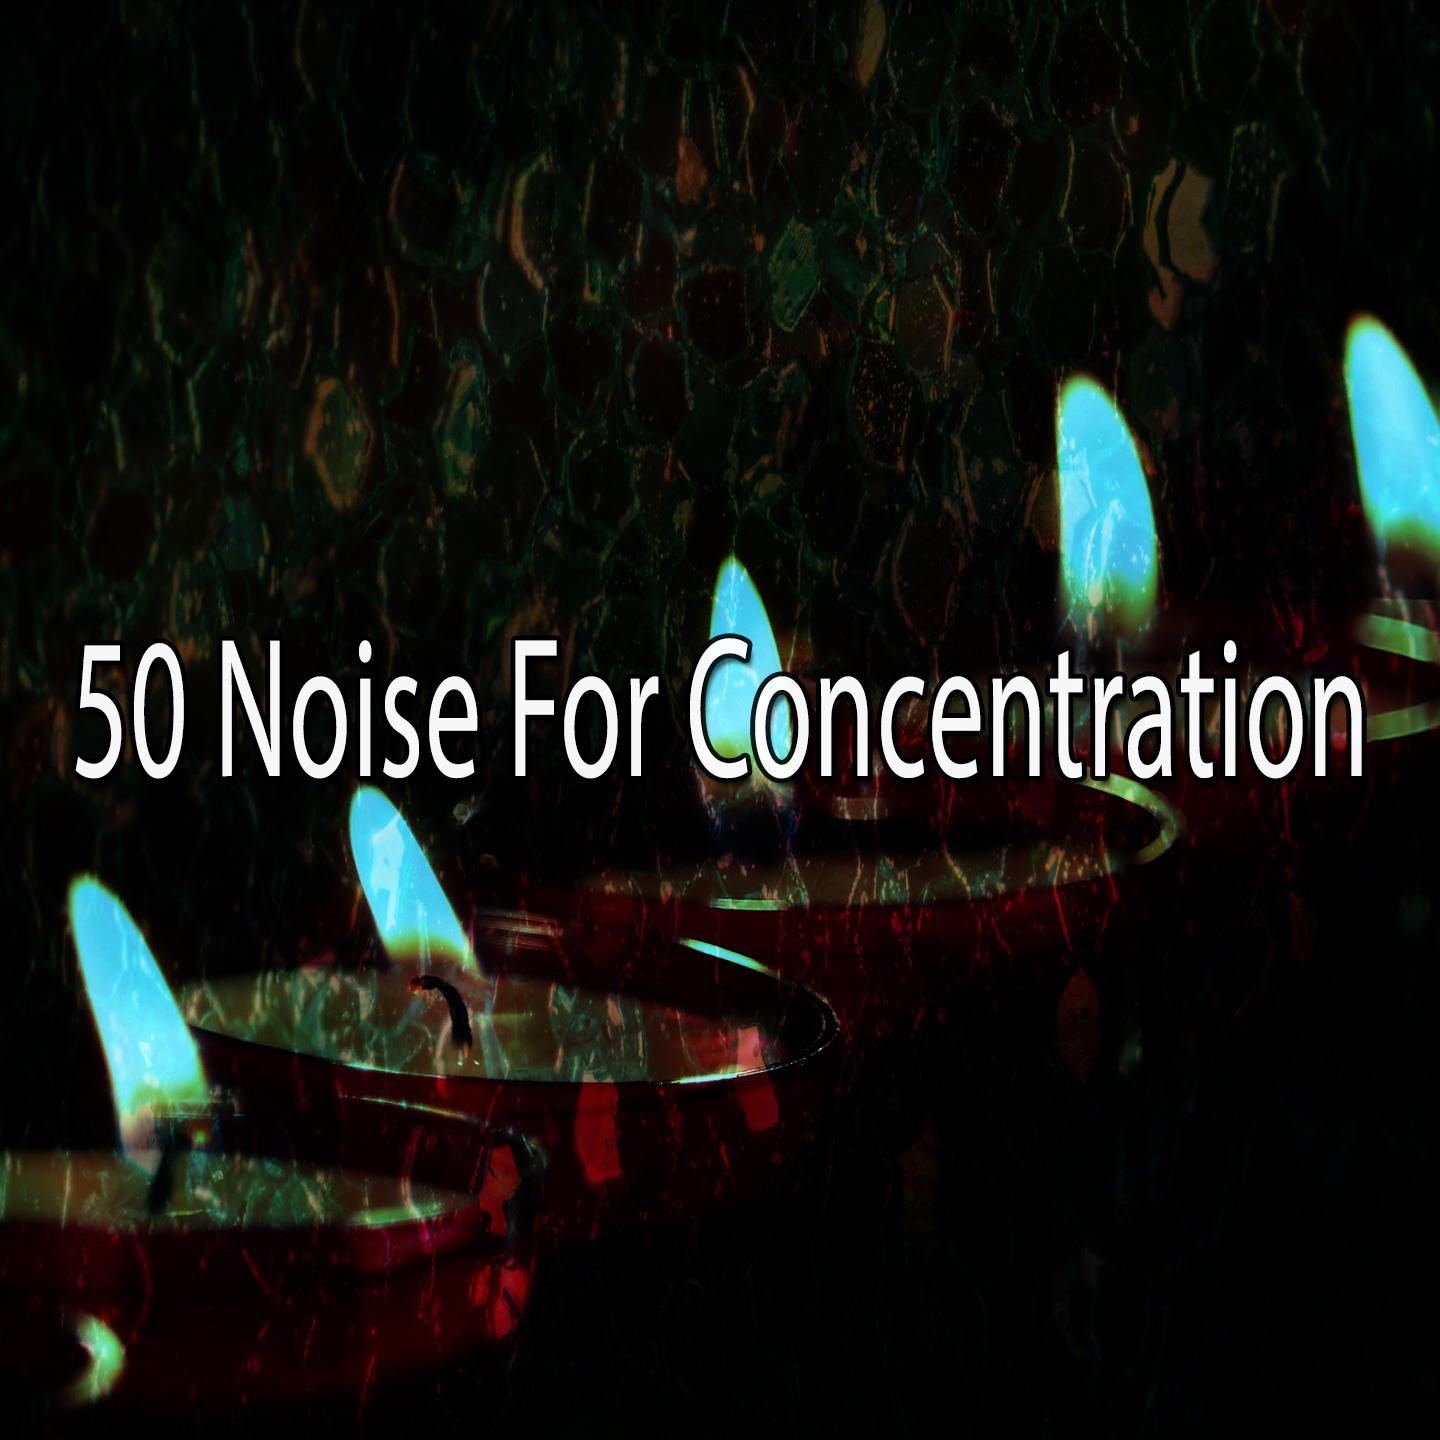 50 Noise for Concentration